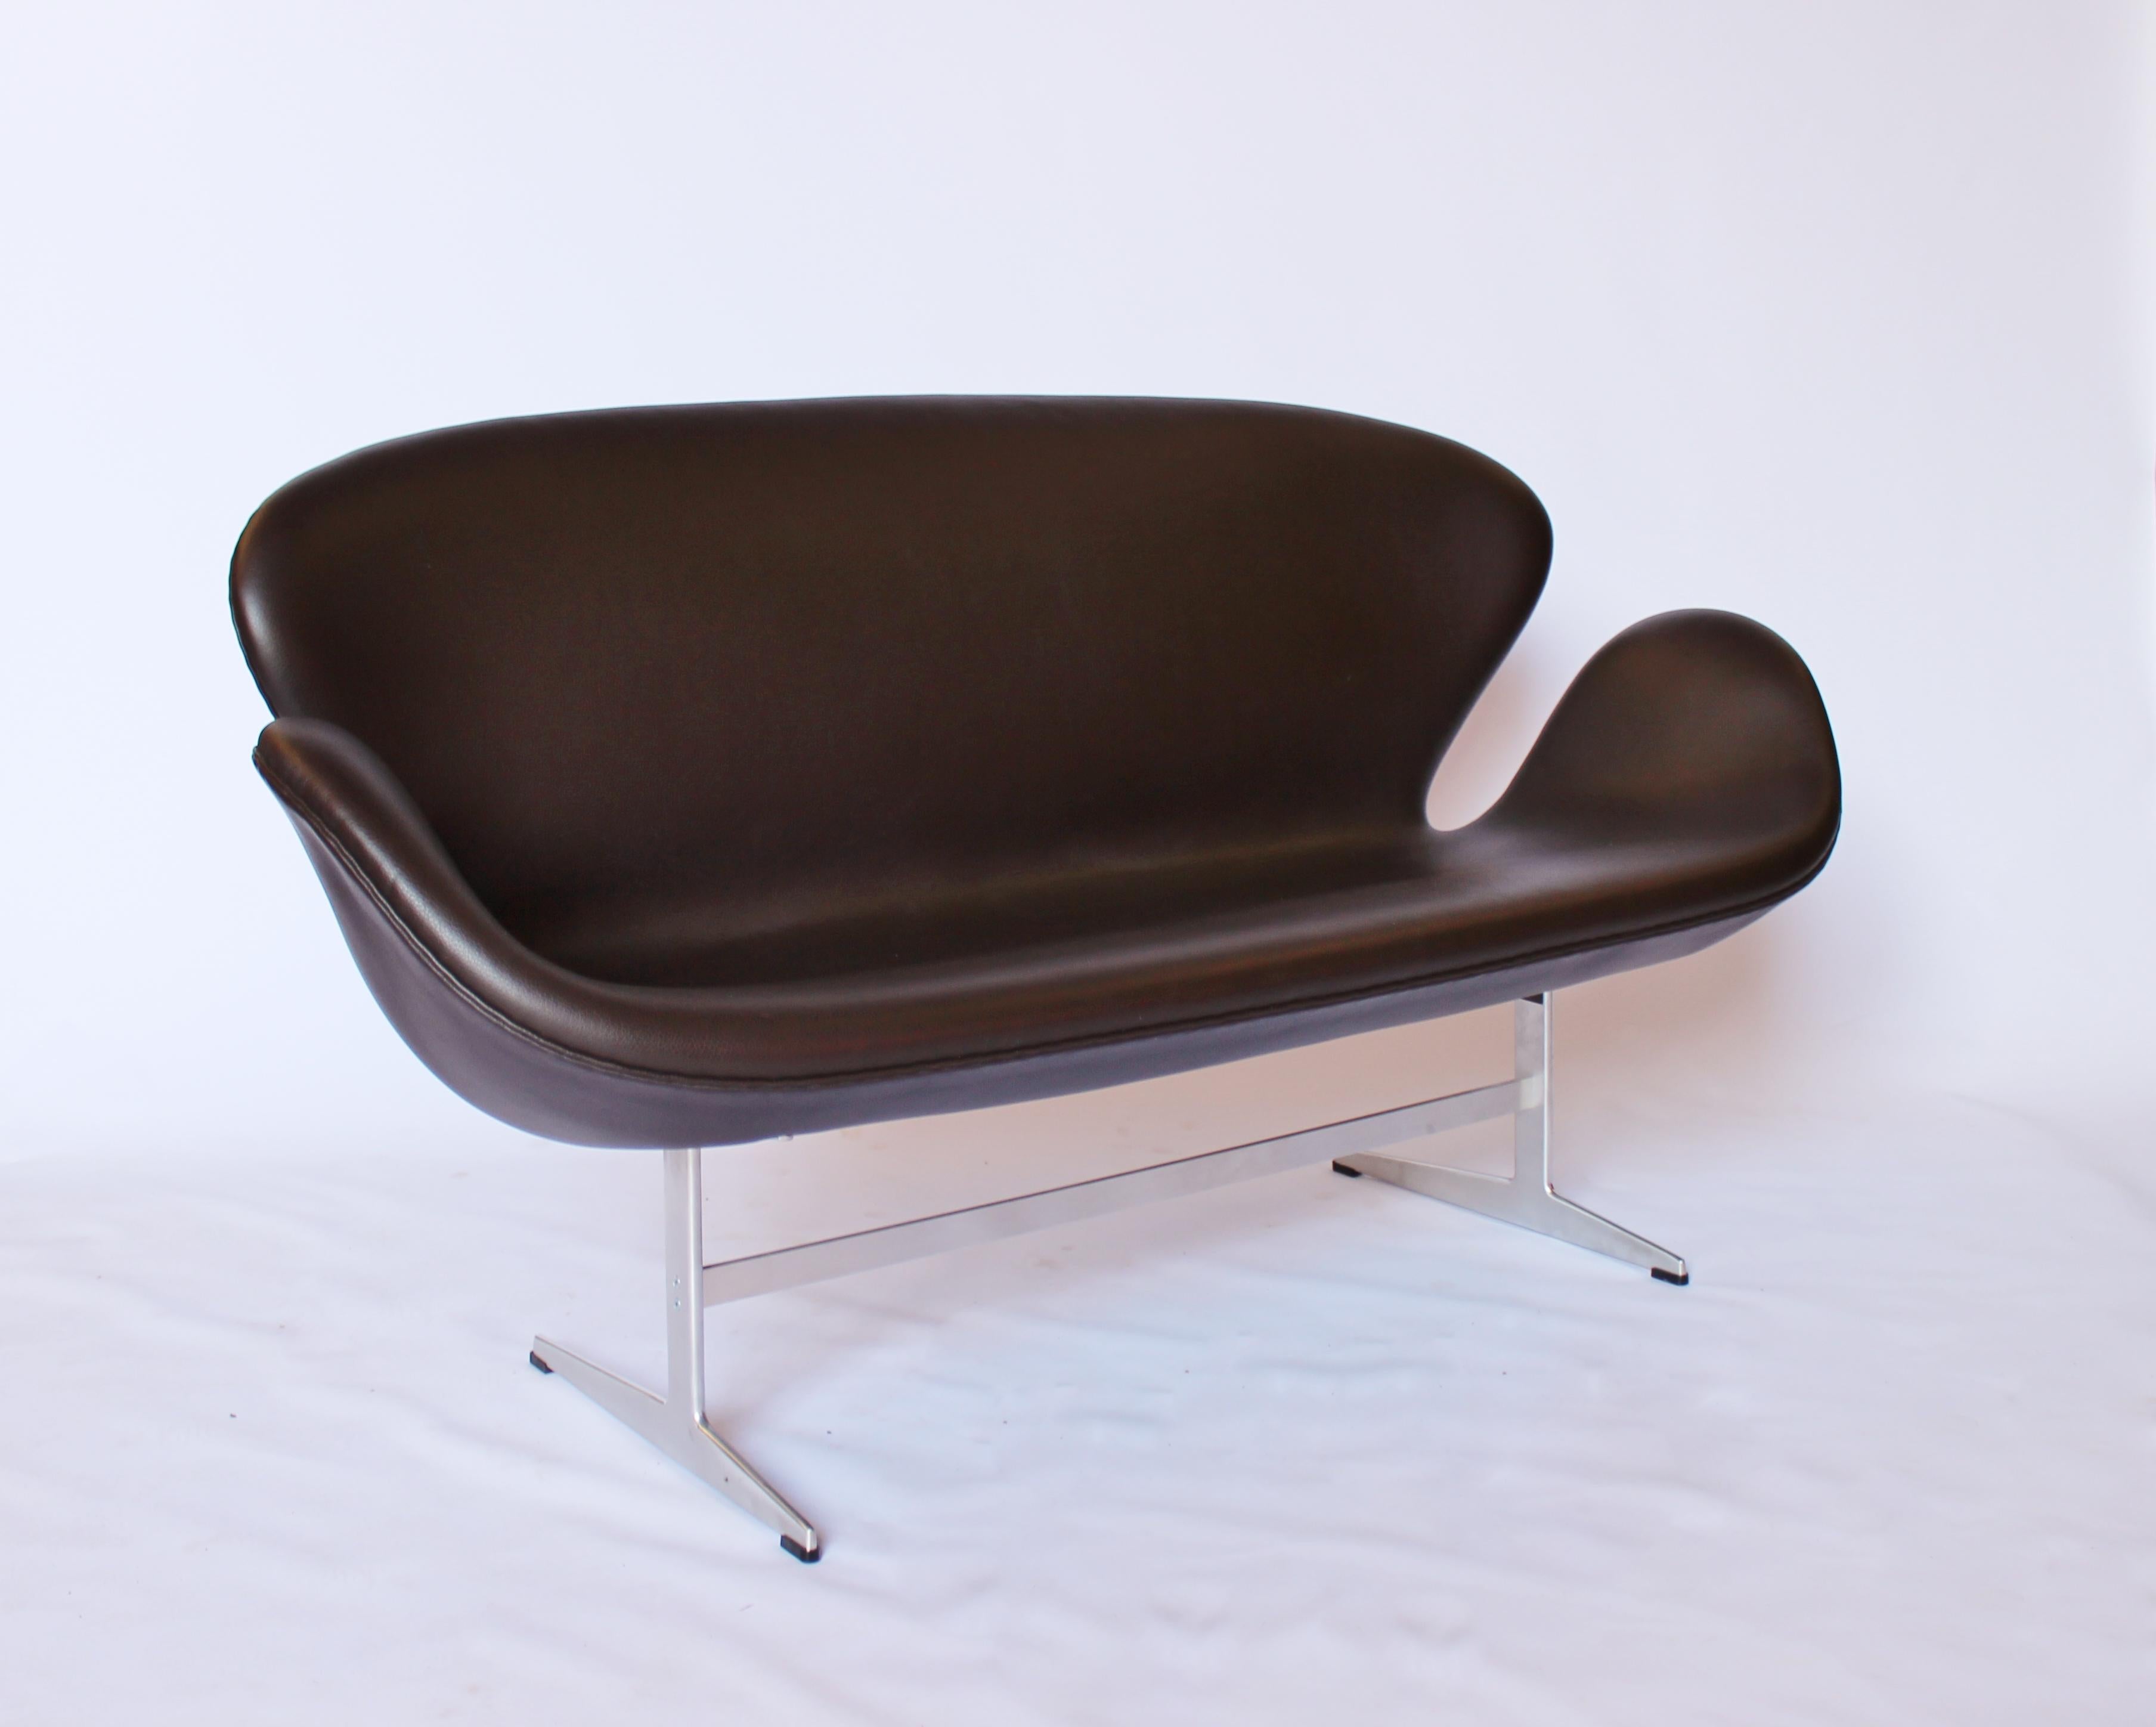 The Swan Sofa, model 3321, is a two-seater sofa designed by Danish architect and designer Arne Jacobsen in the 1960s. It features a sleek and curvy design that is reminiscent of the swan's shape, and it has become an iconic piece of furniture in